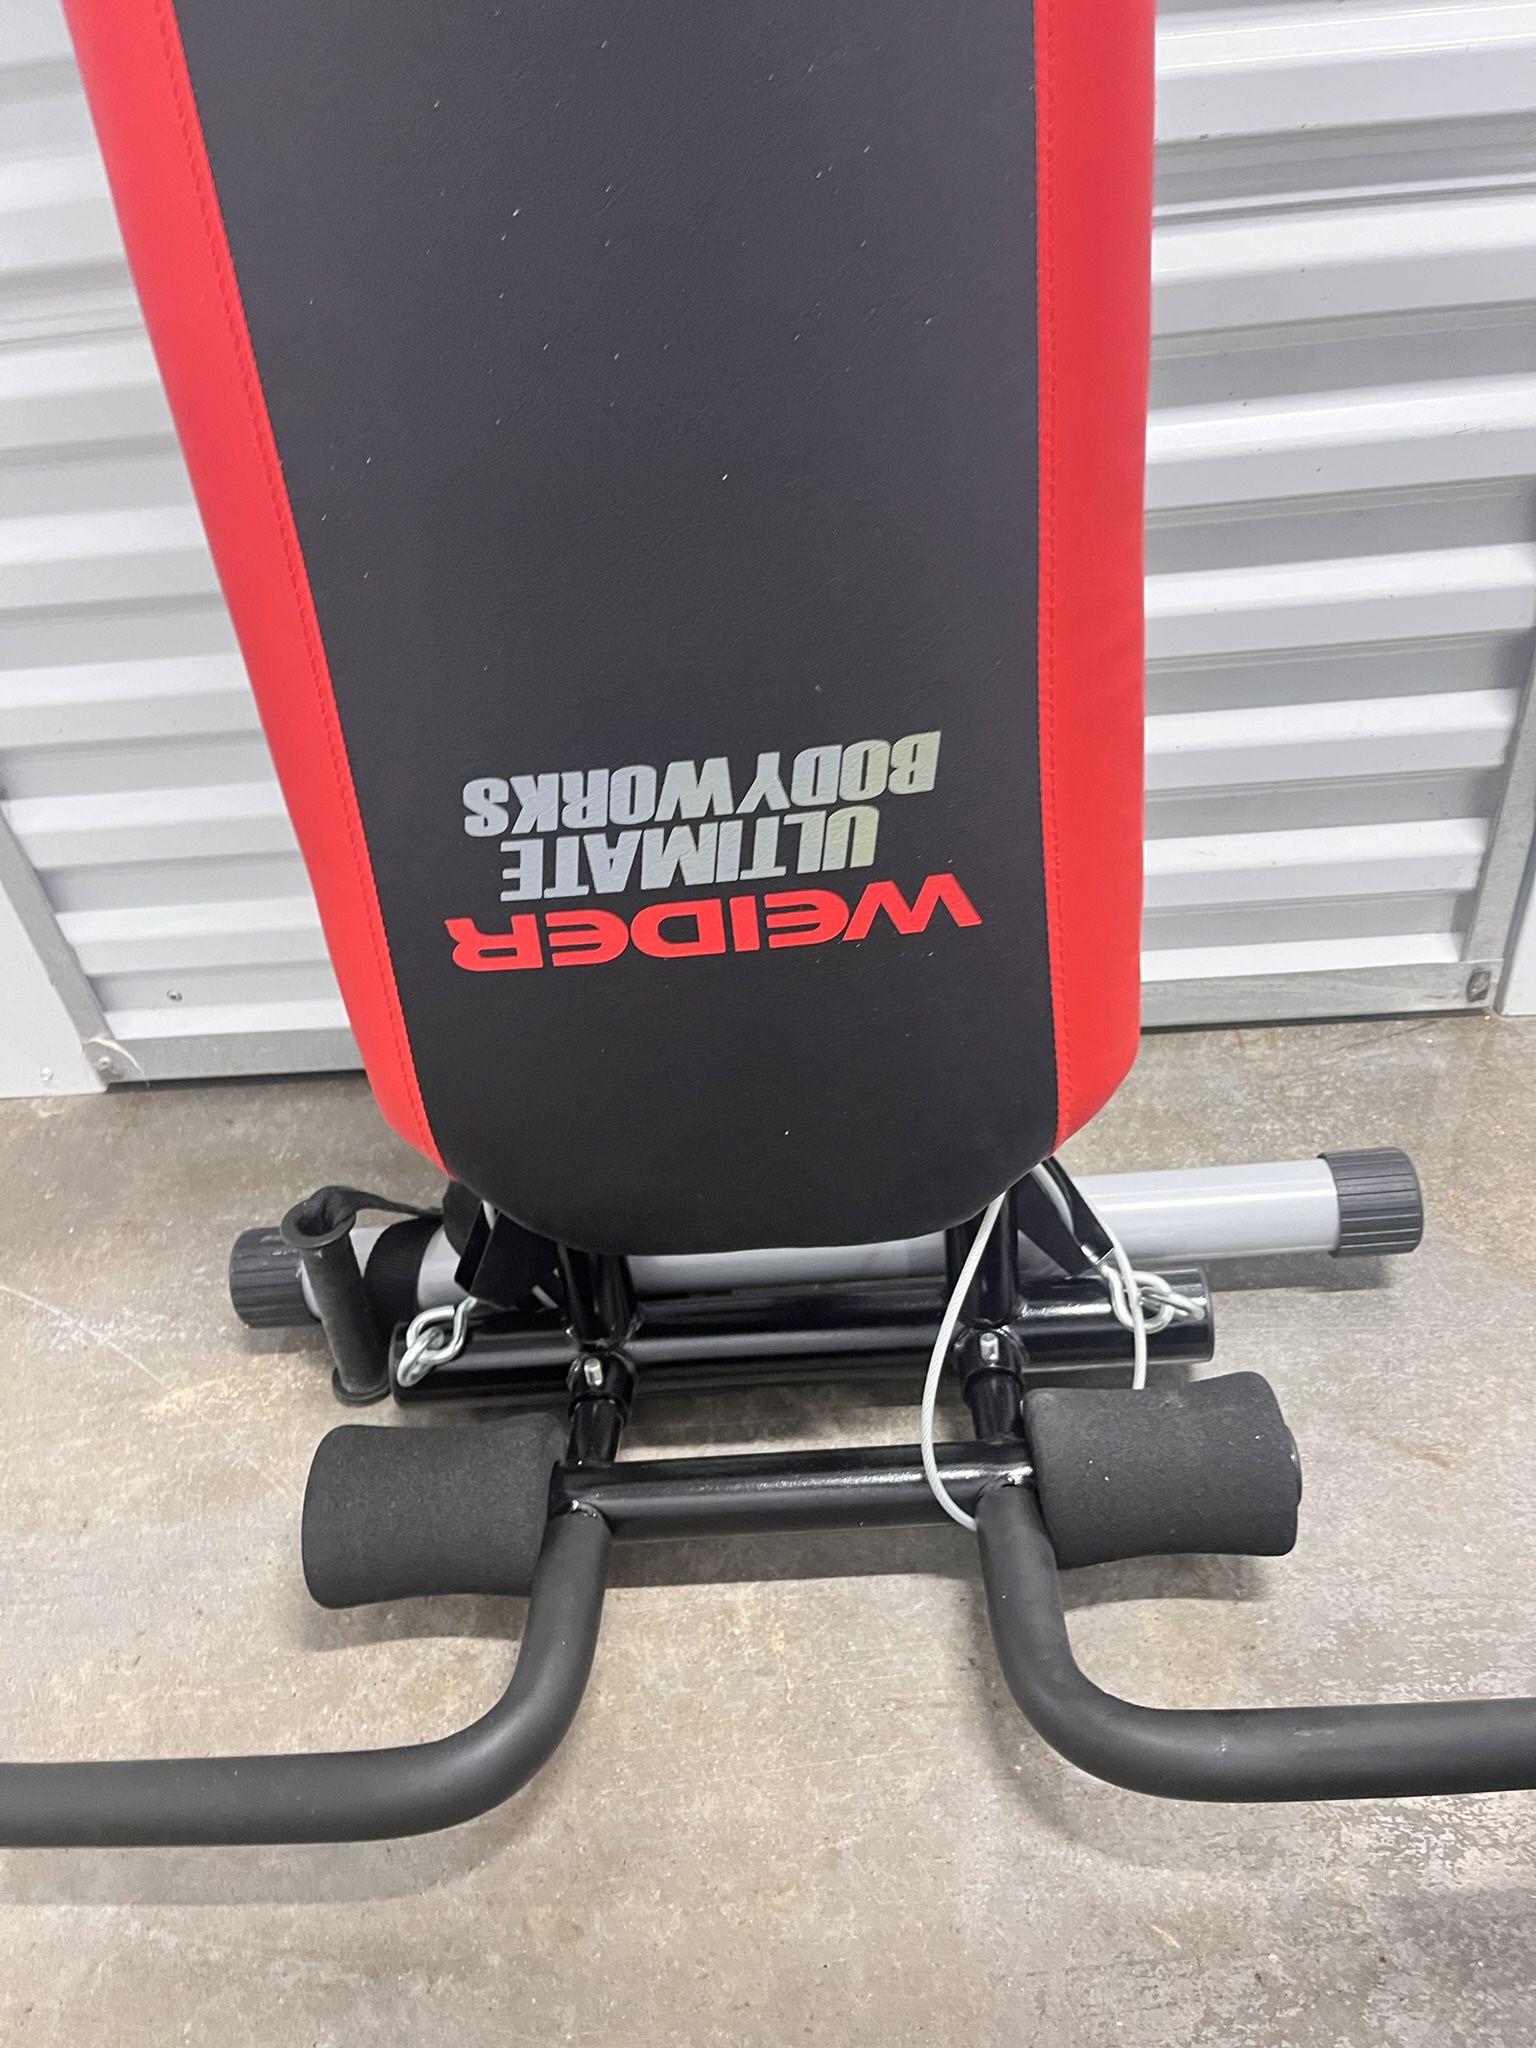 Work Out Equipment  For Sale